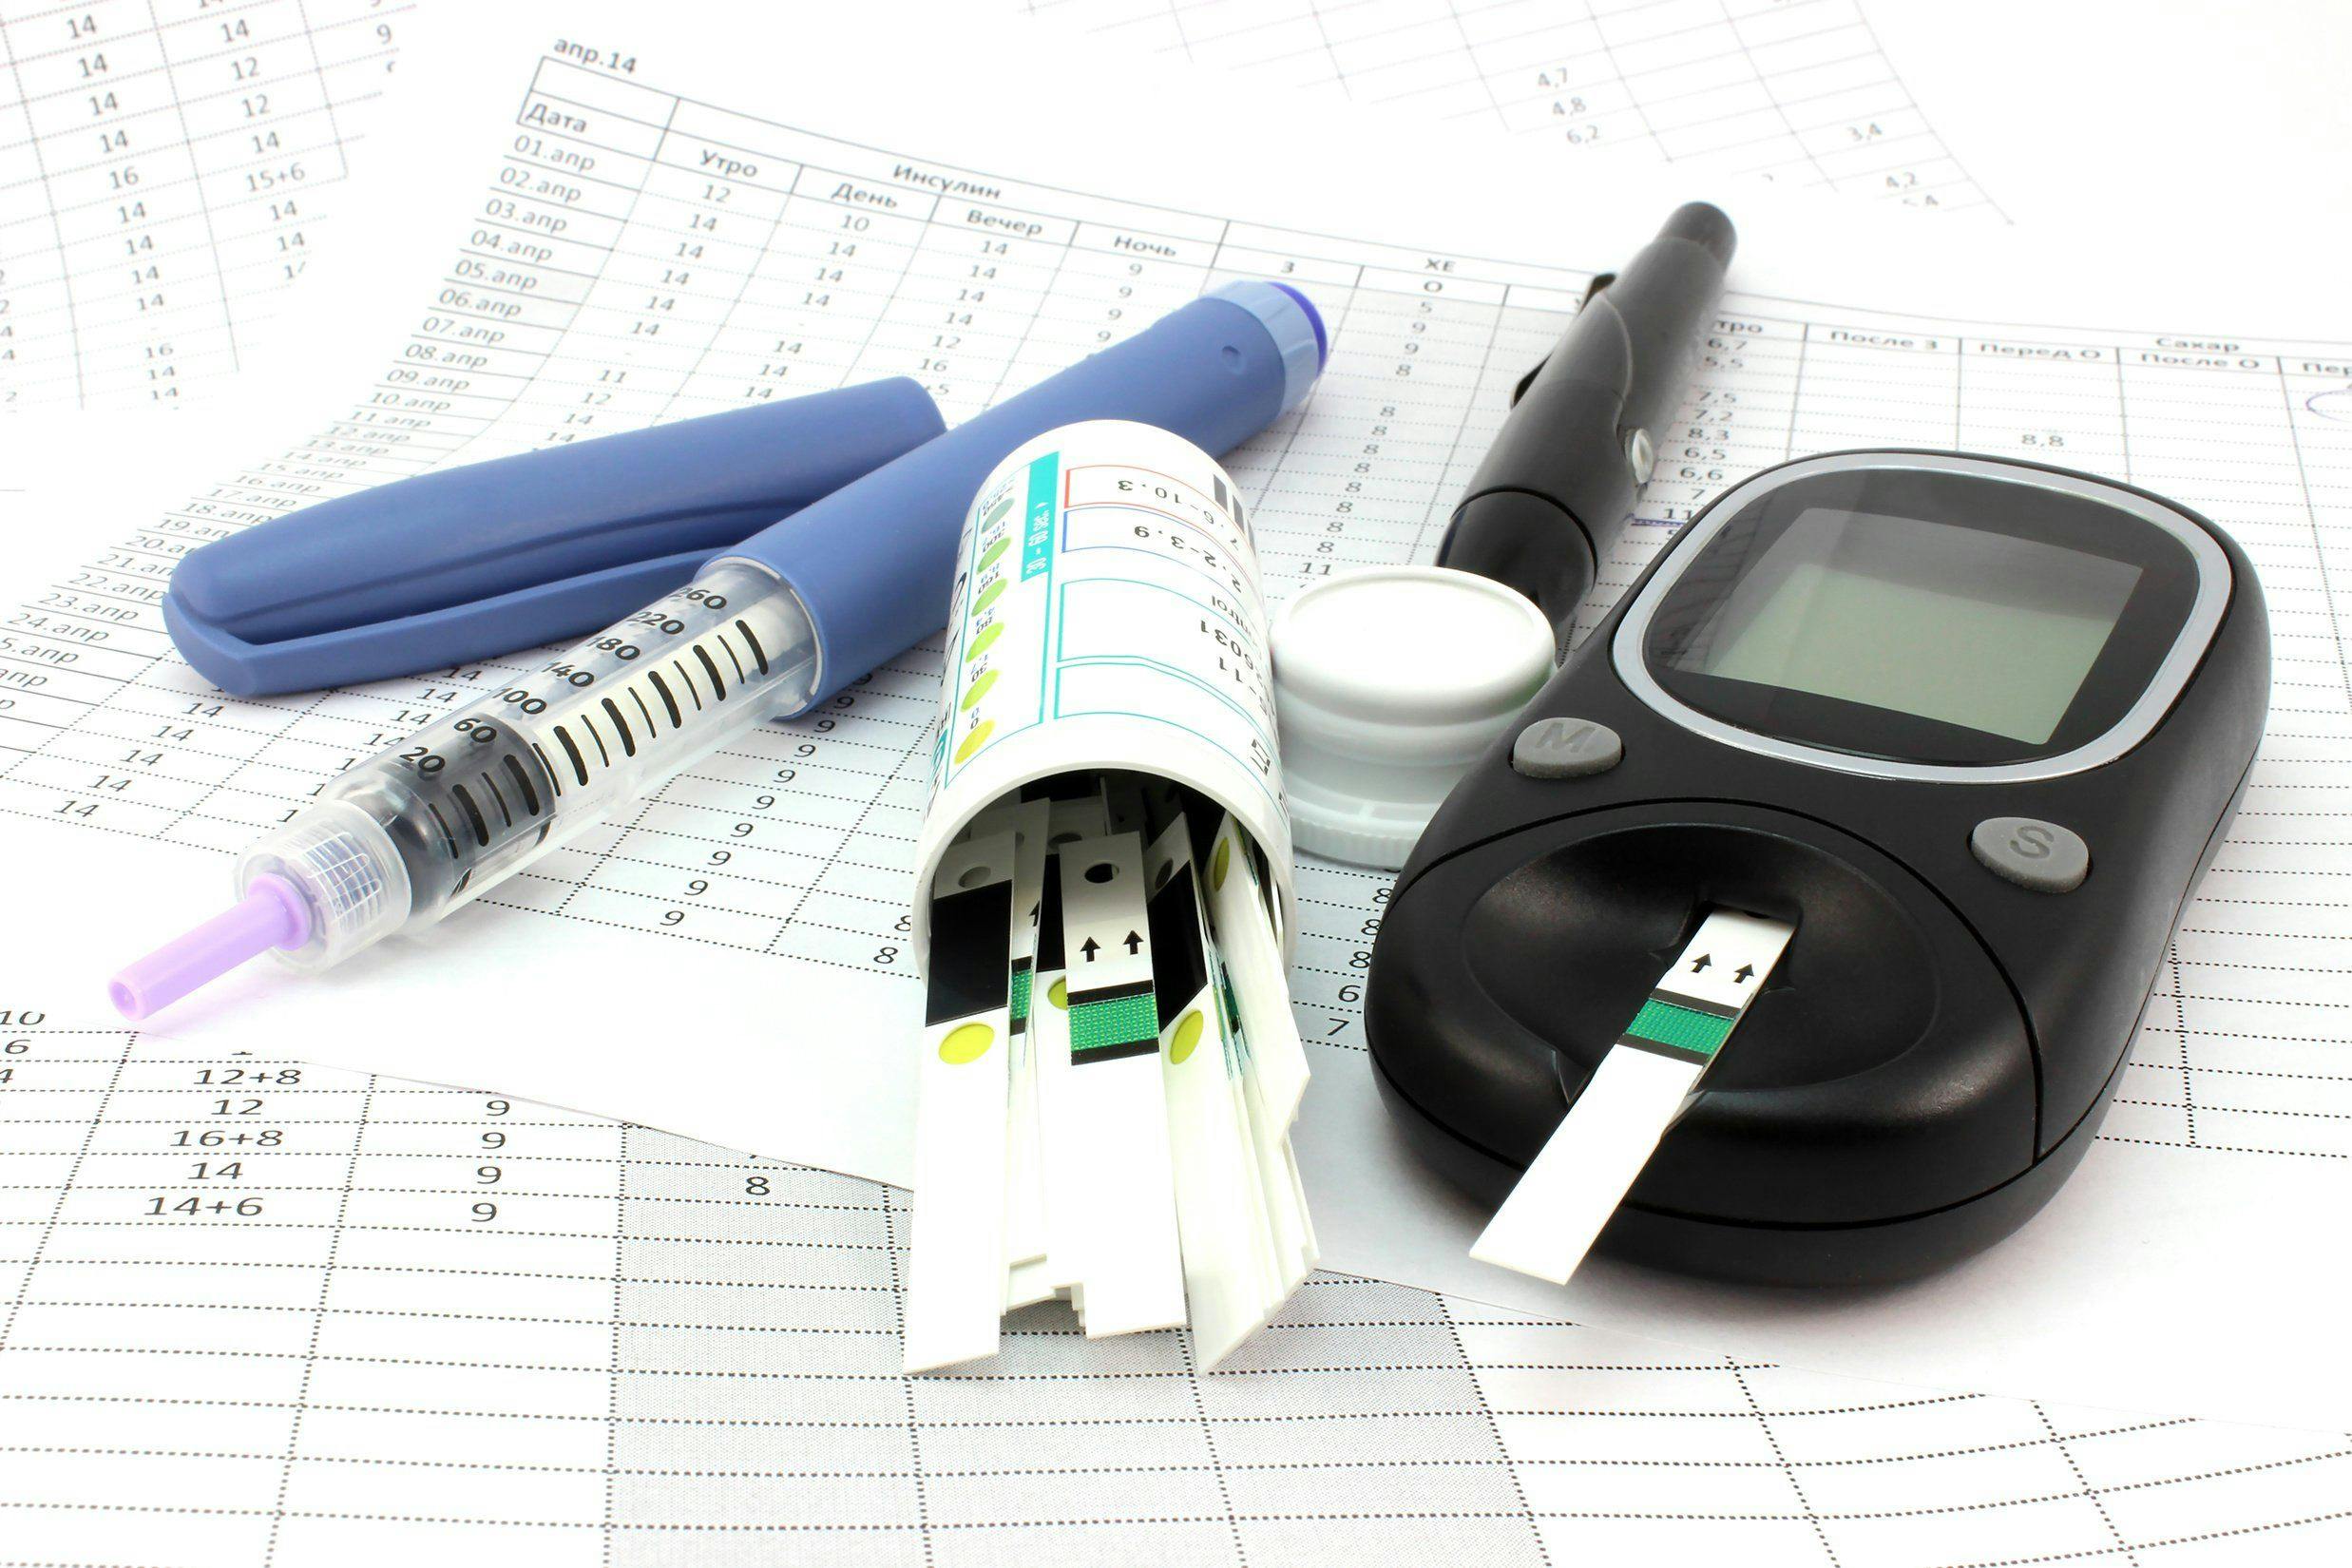 Stock imagery related to diabetes management.